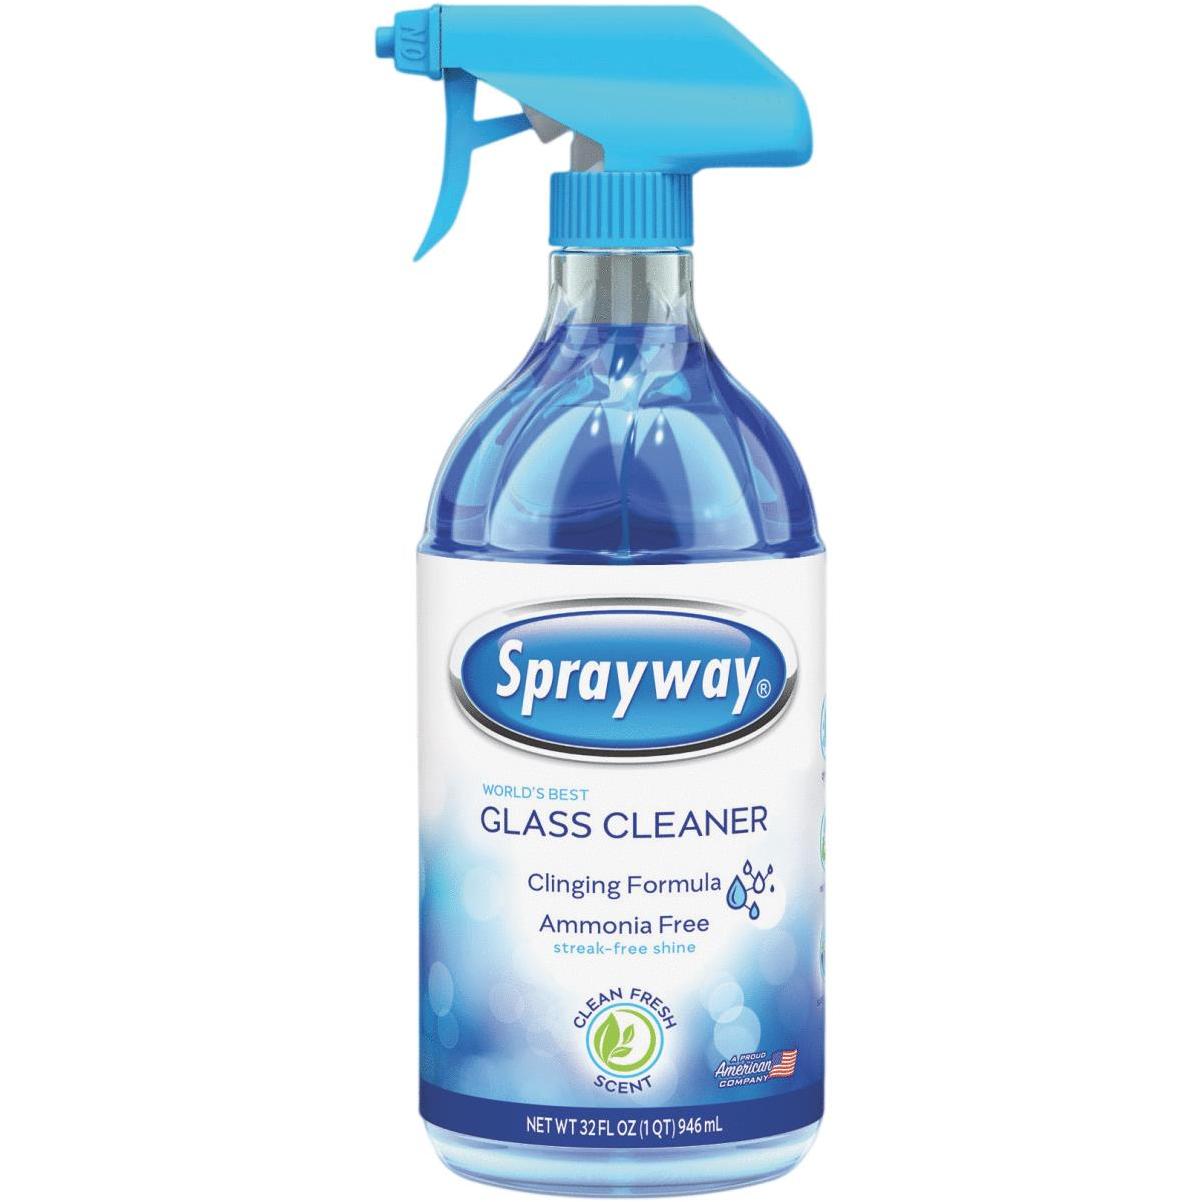 Blue Ribbon Products Plexi-Clean 16 Oz. Acrylic & Plastic Cleaner